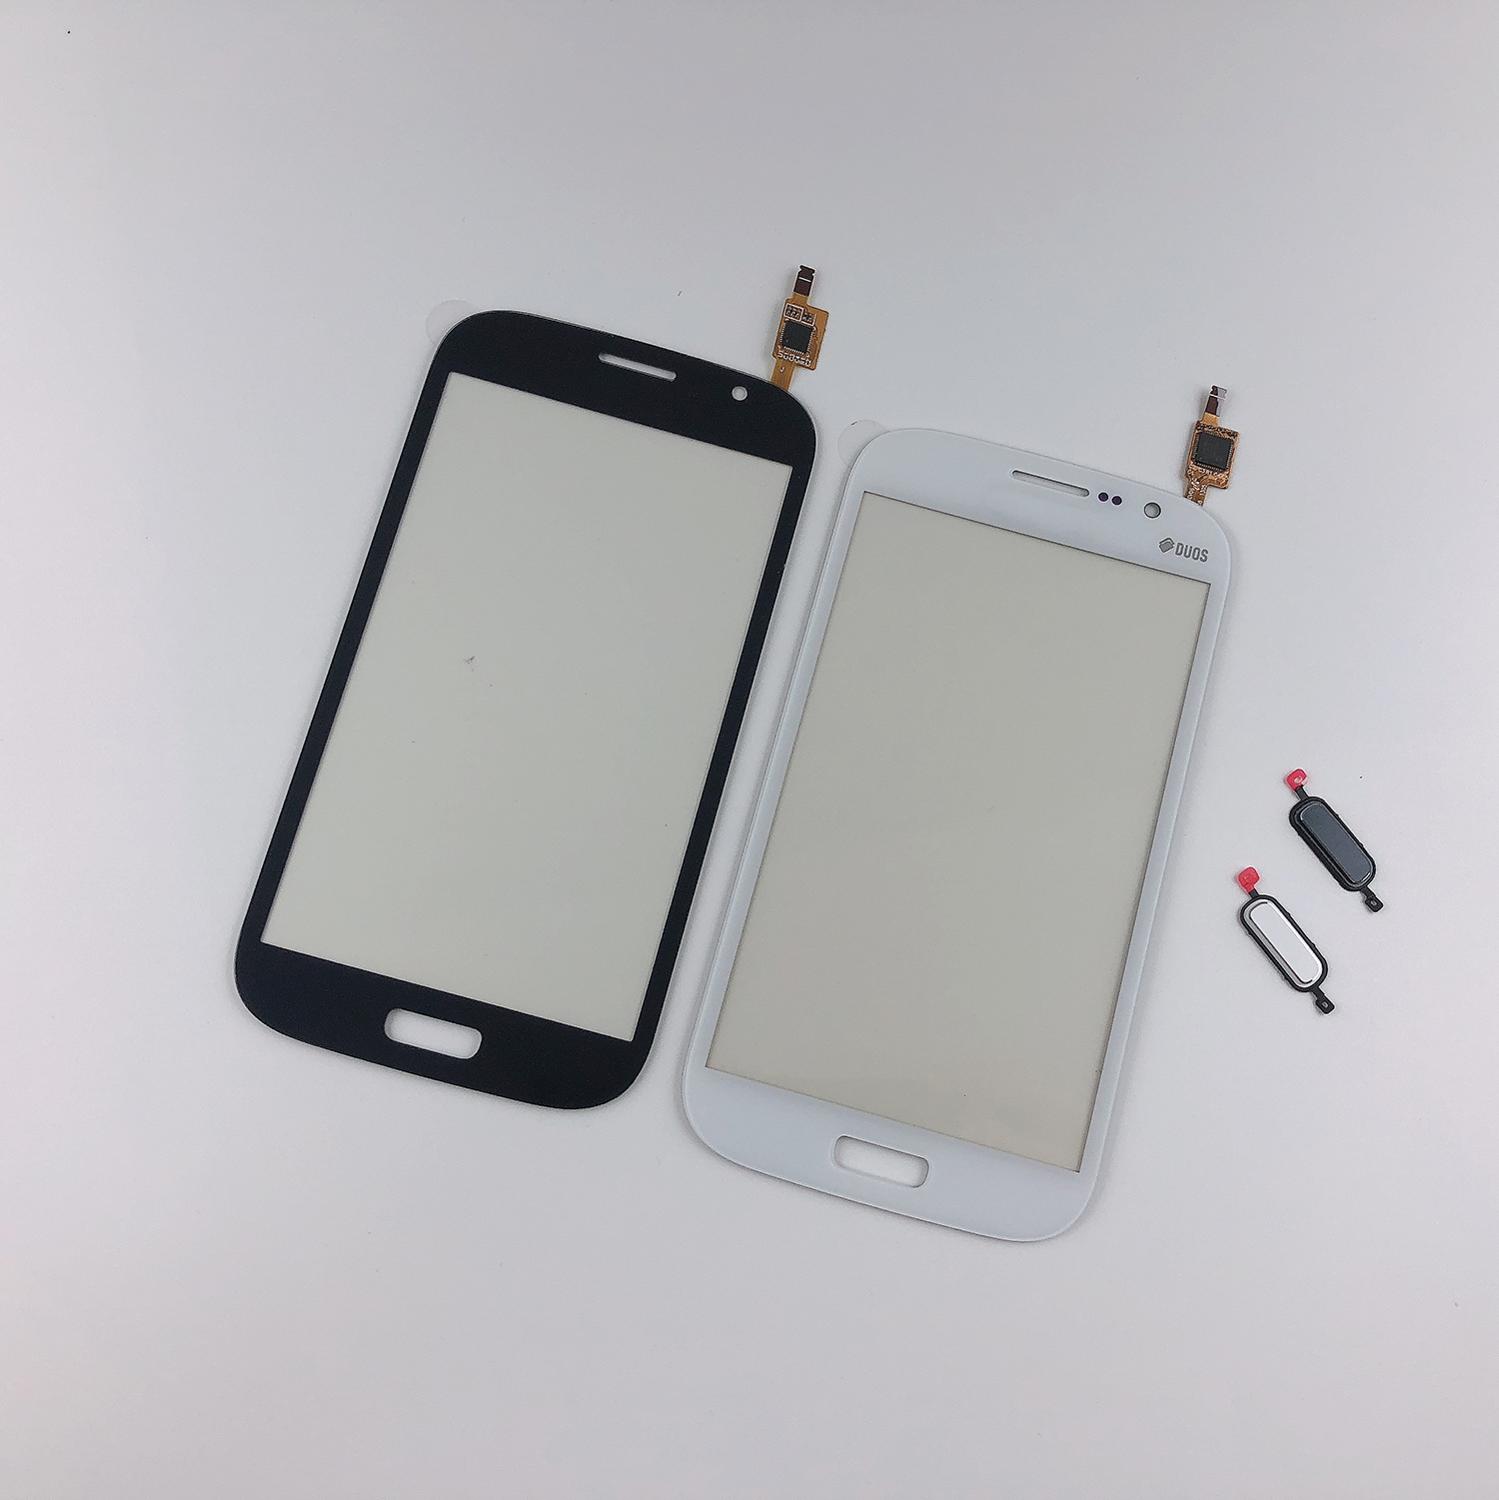 Voor Samsung Galaxy Grand GT i9082 i9080 Neo i9060 i9062 Touch Screen Digitizer Voor Glas Panel + 3M Tape + Home Button Return Key